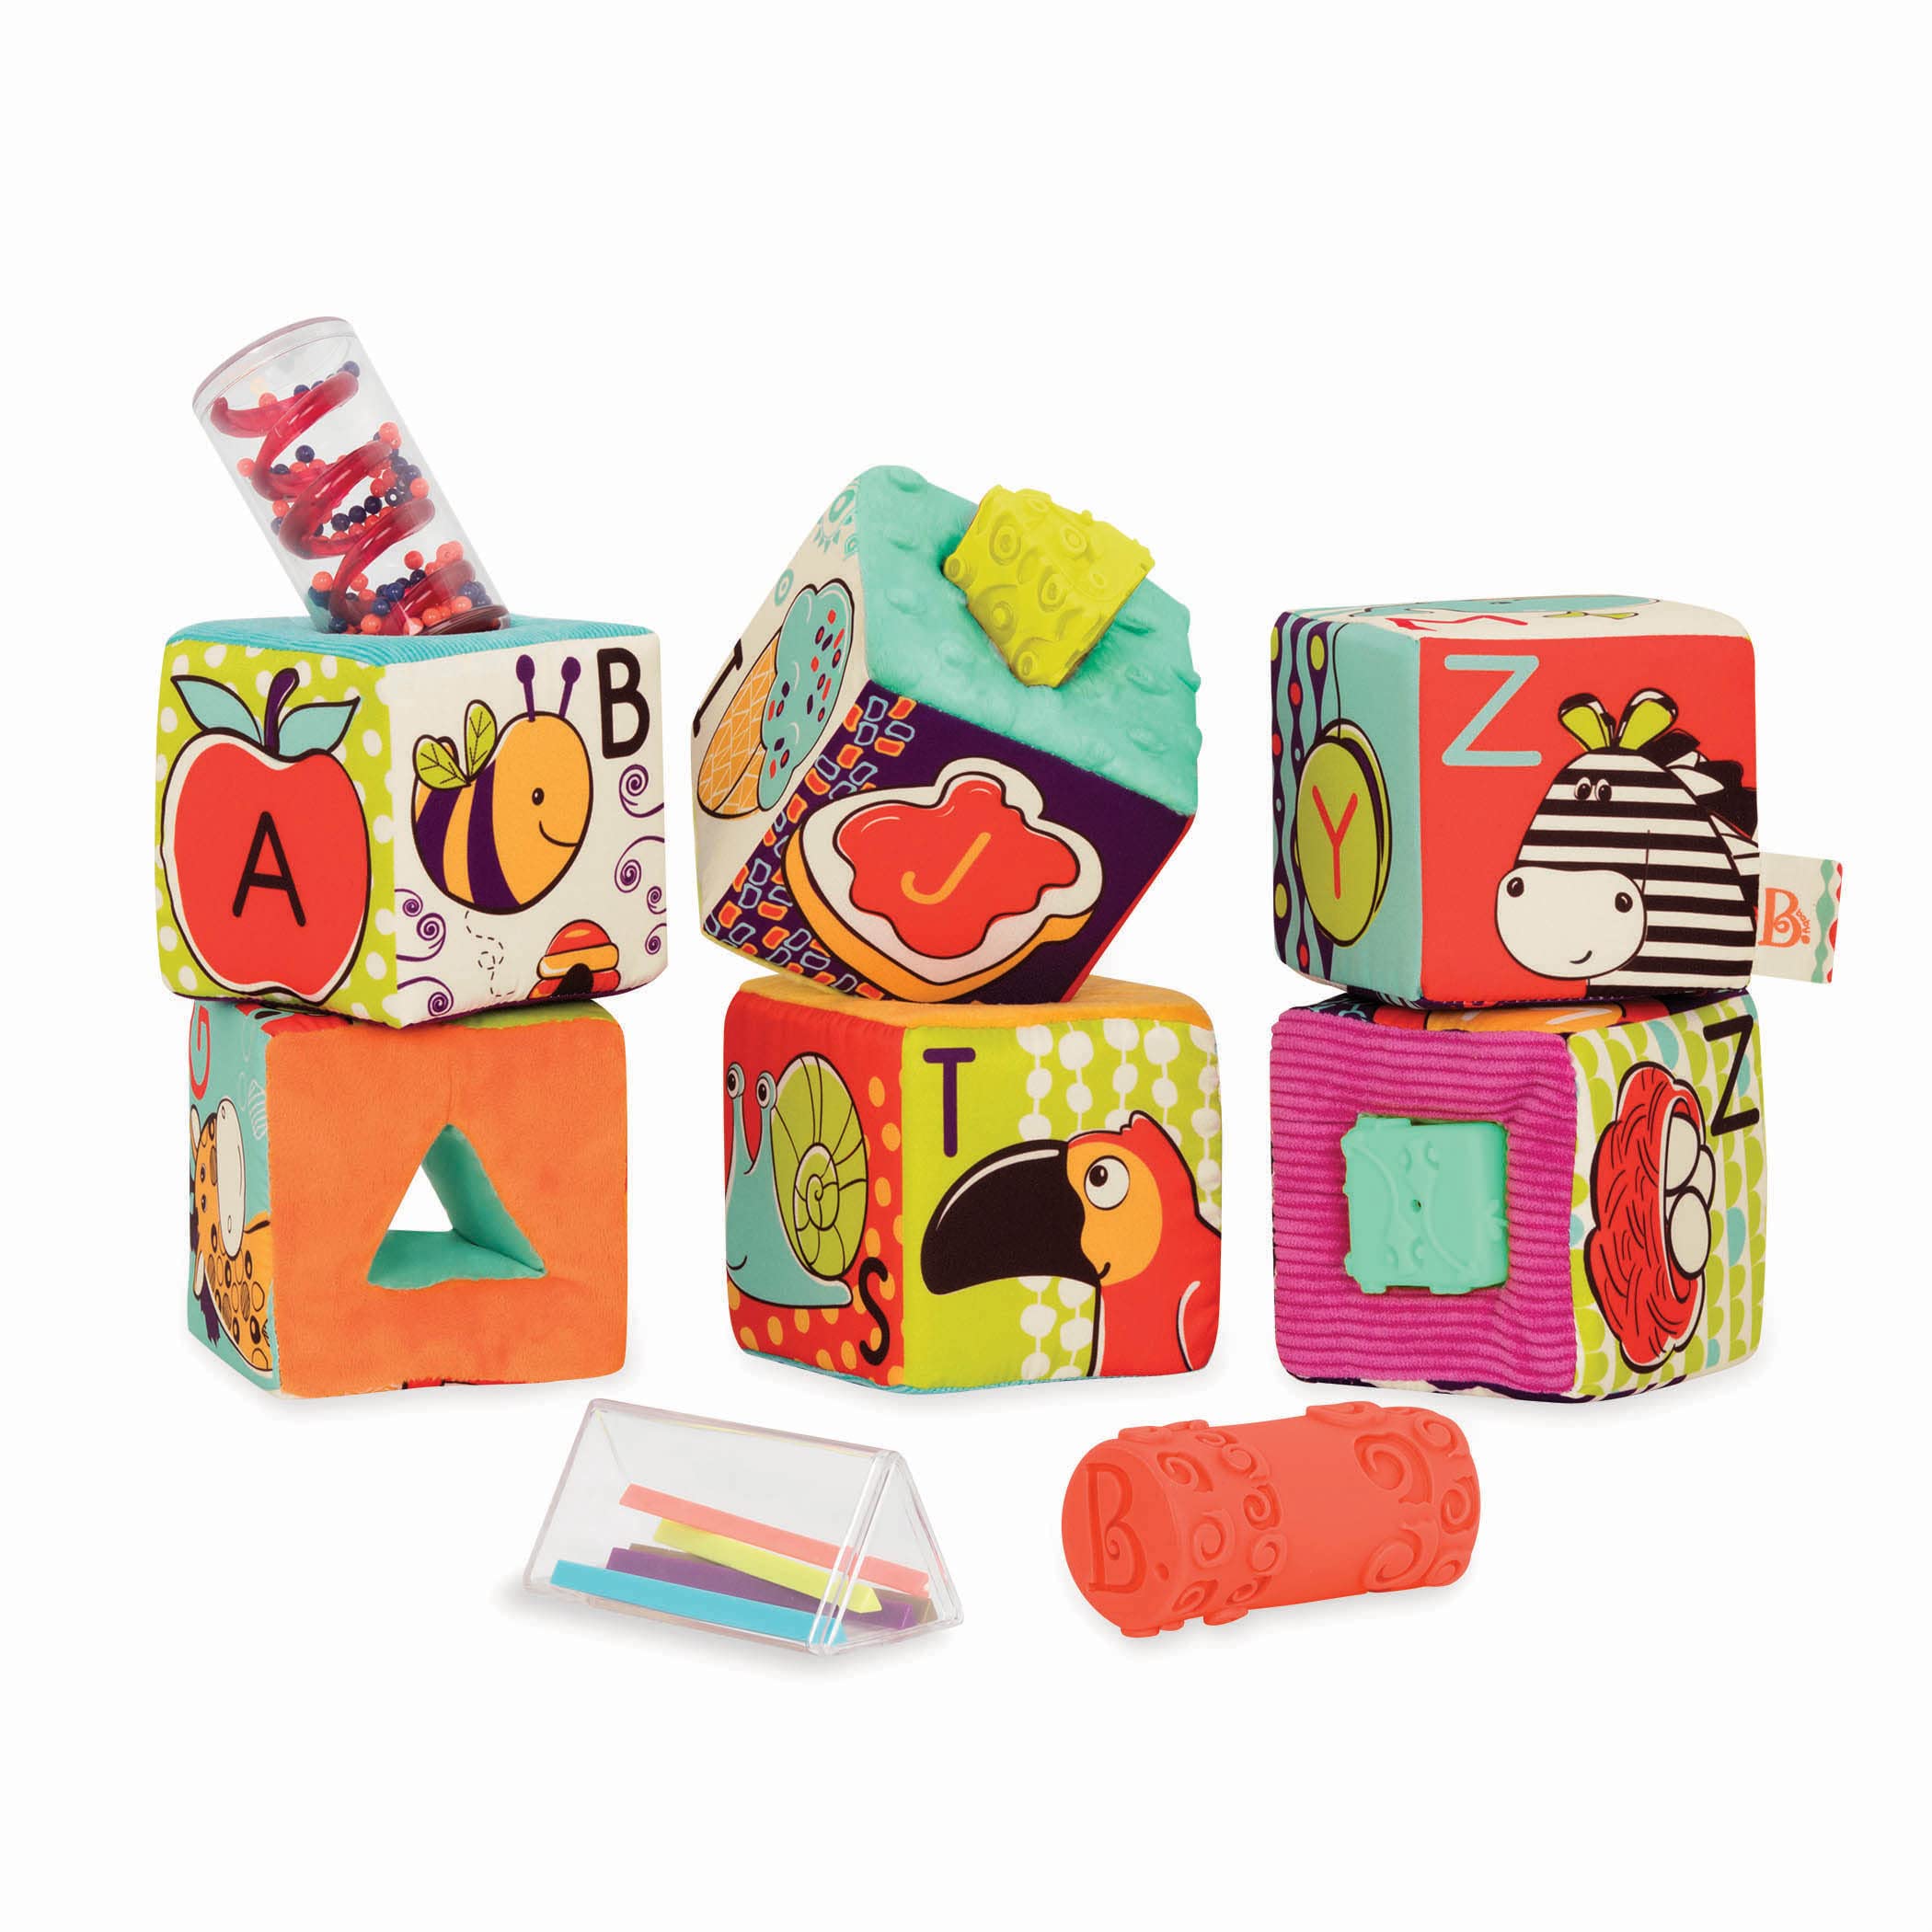 B. Toys by Battat ABC Block Party Baby Blocks – Soft Fabric Building Blocks for Toddlers – Educational Alphabet Blocks with 6 Textured Toy Blocks & 5 Shapes – Grab & Stack Blocks, Multicolored